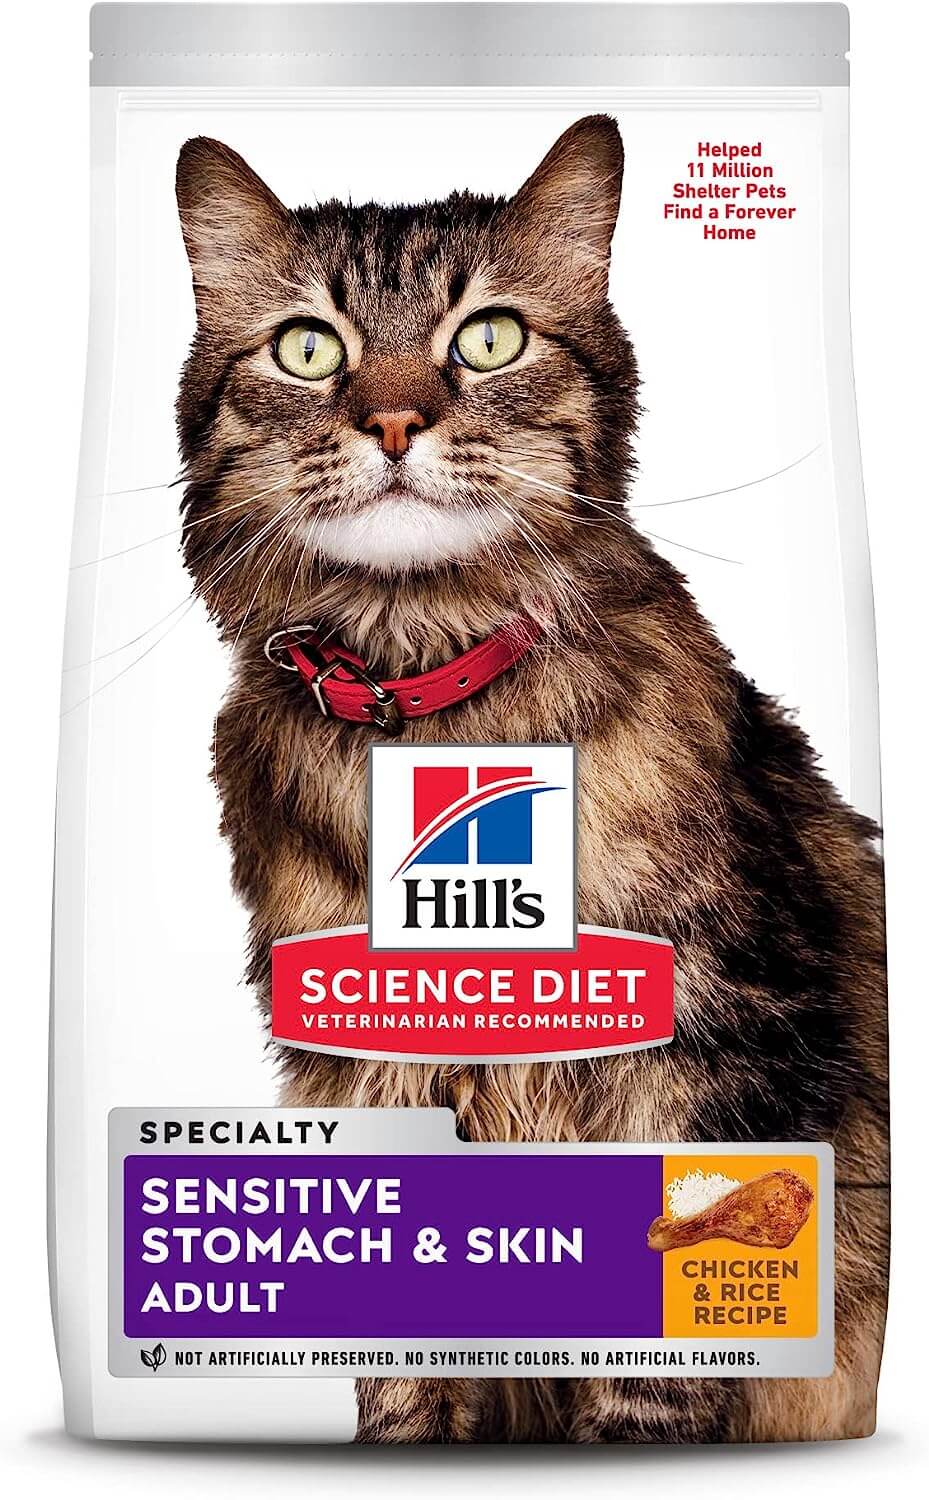 Hill's Science Diet Dry Cat Food for sensitive stomach